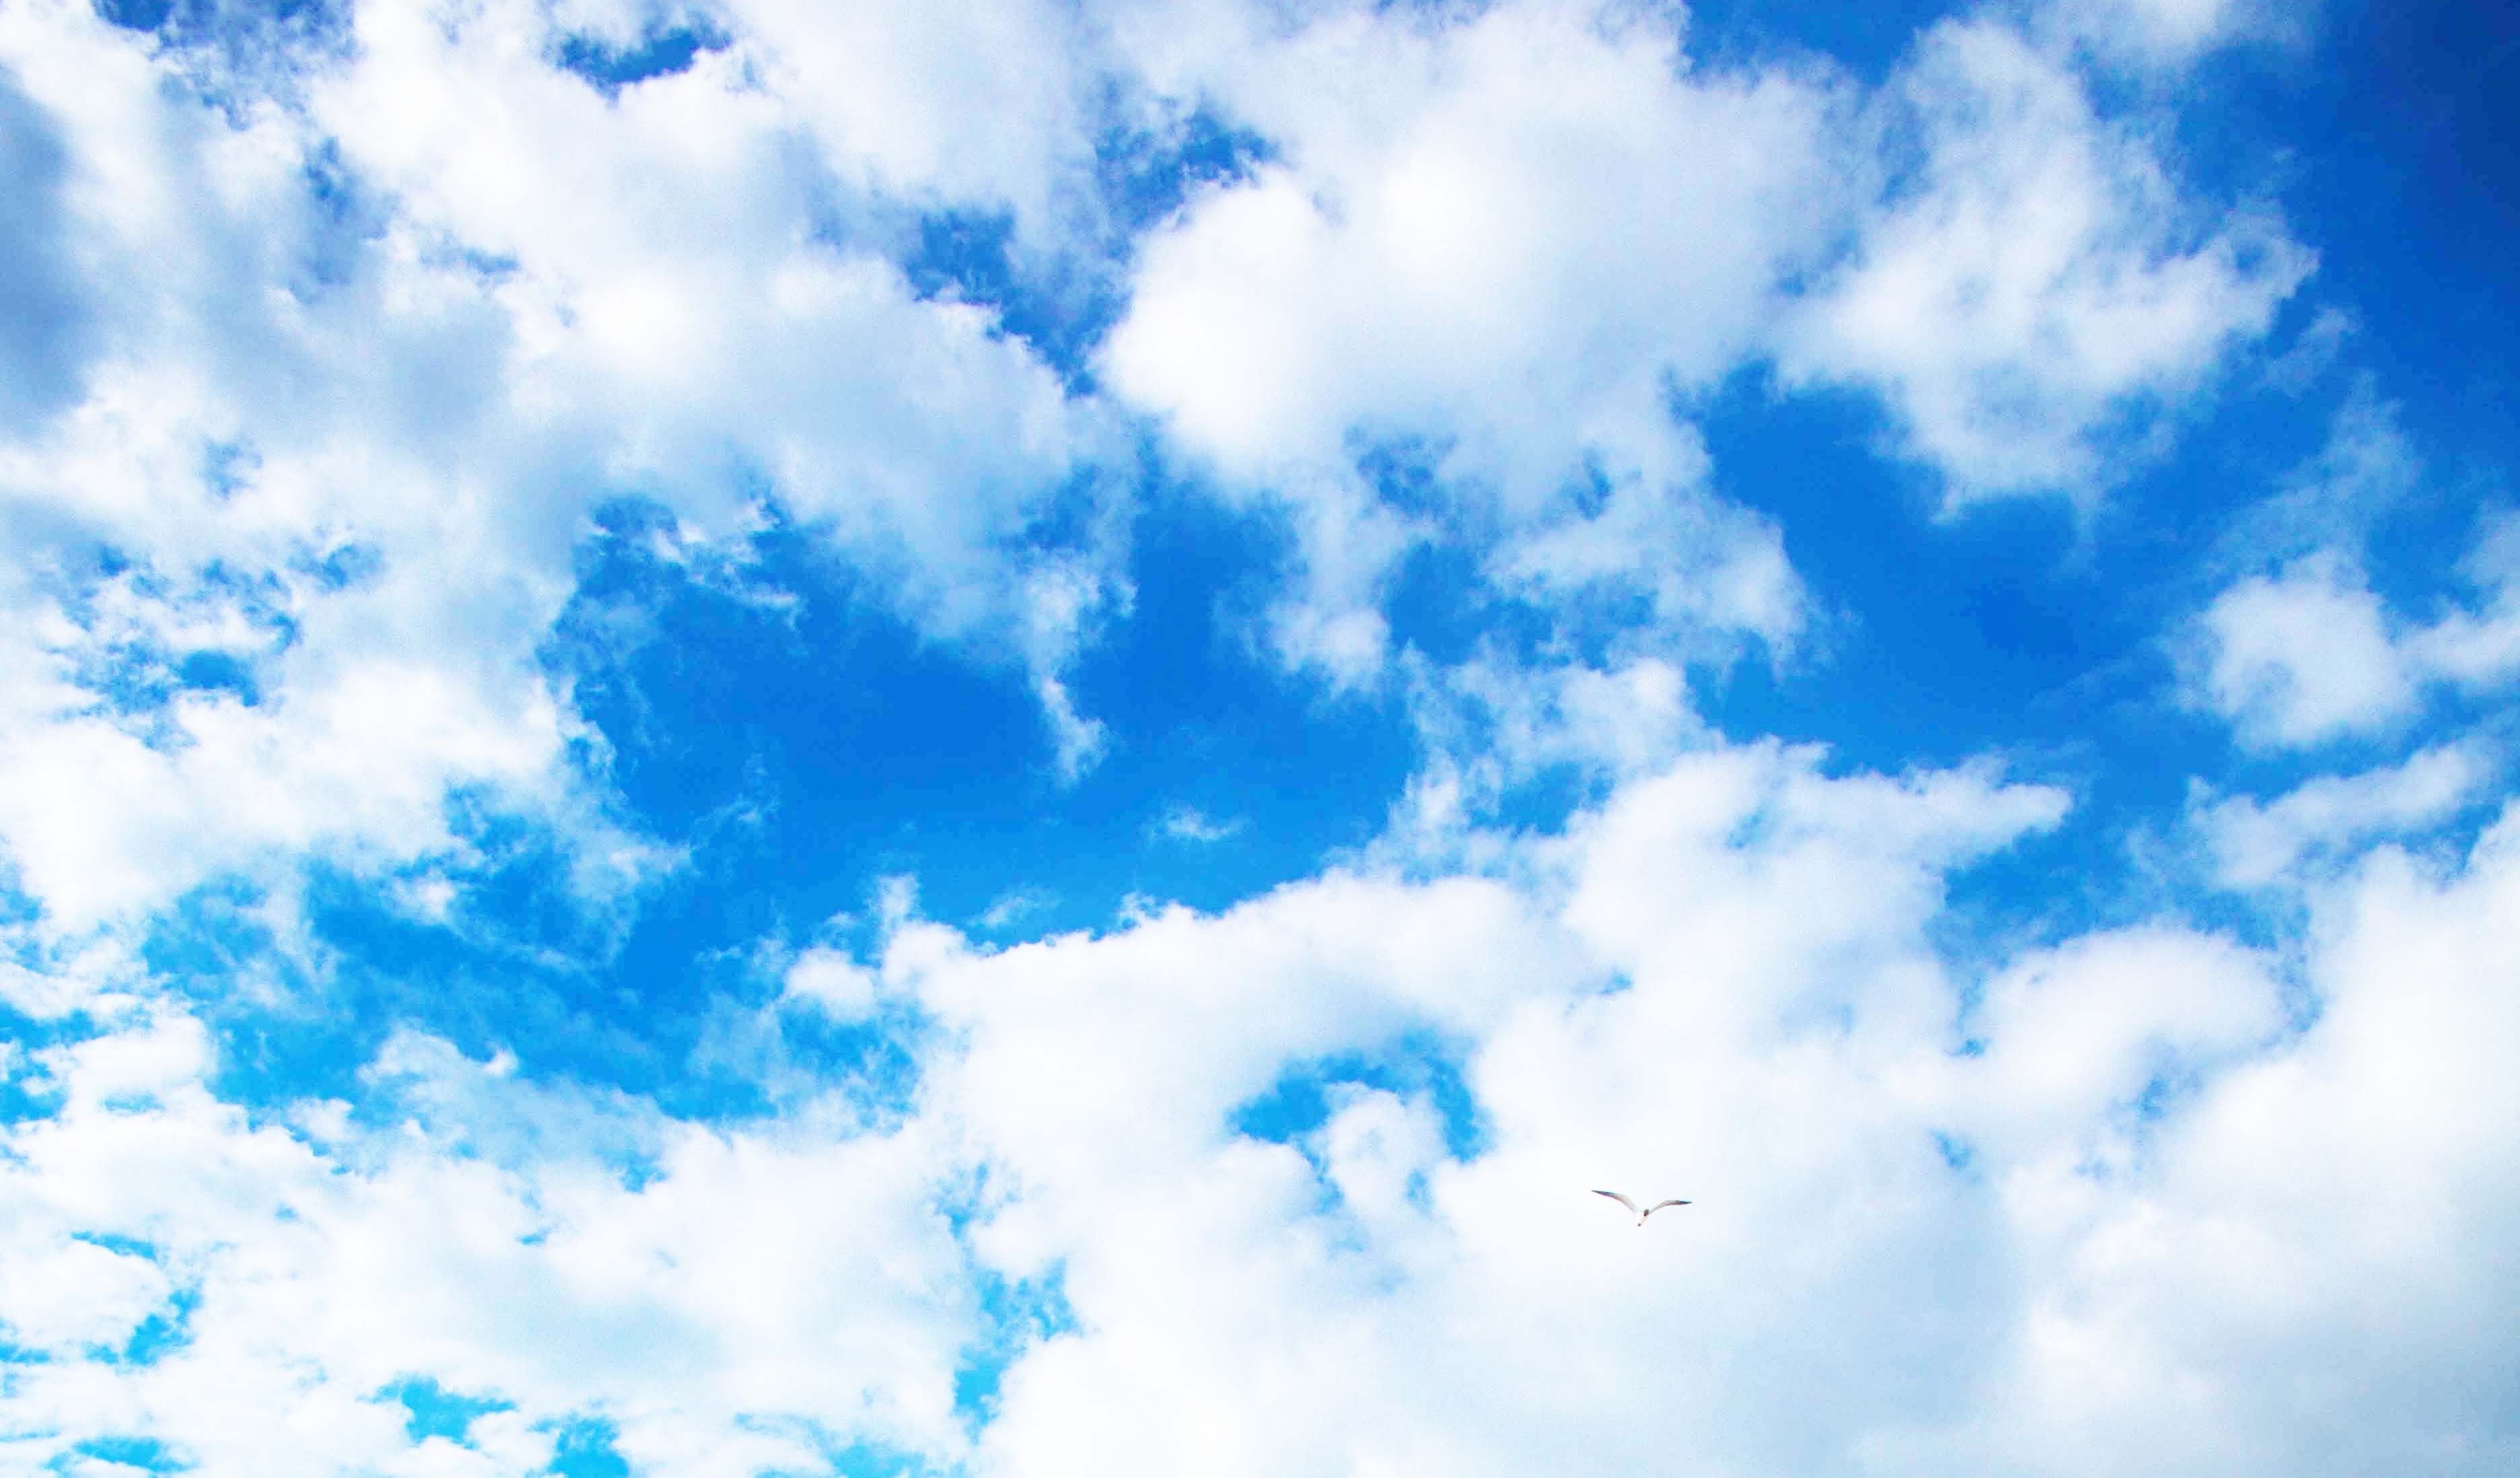 Cloud Background - 99wallpapers